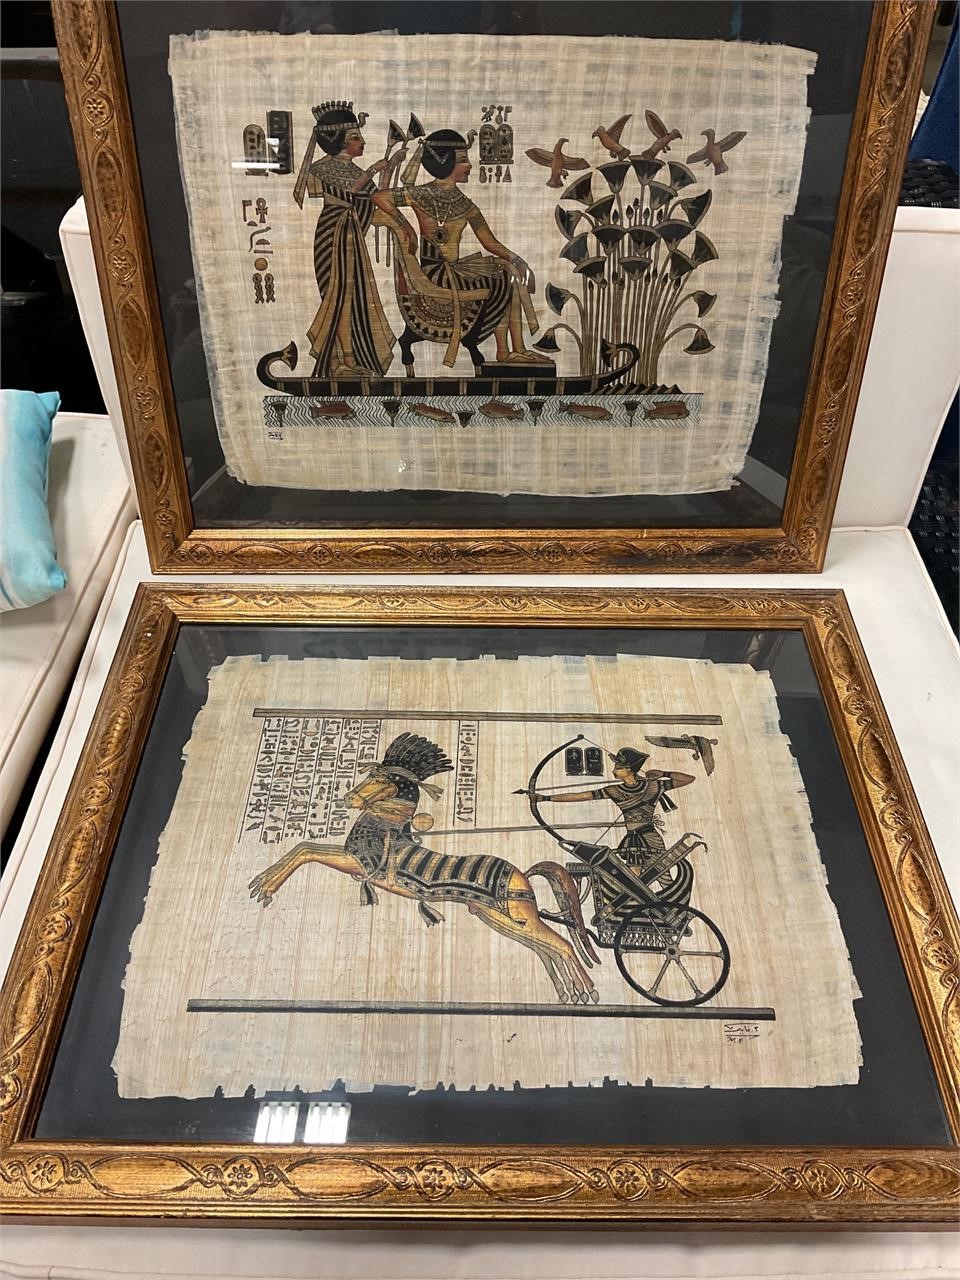 Egyptian framed pictures 23”x19”